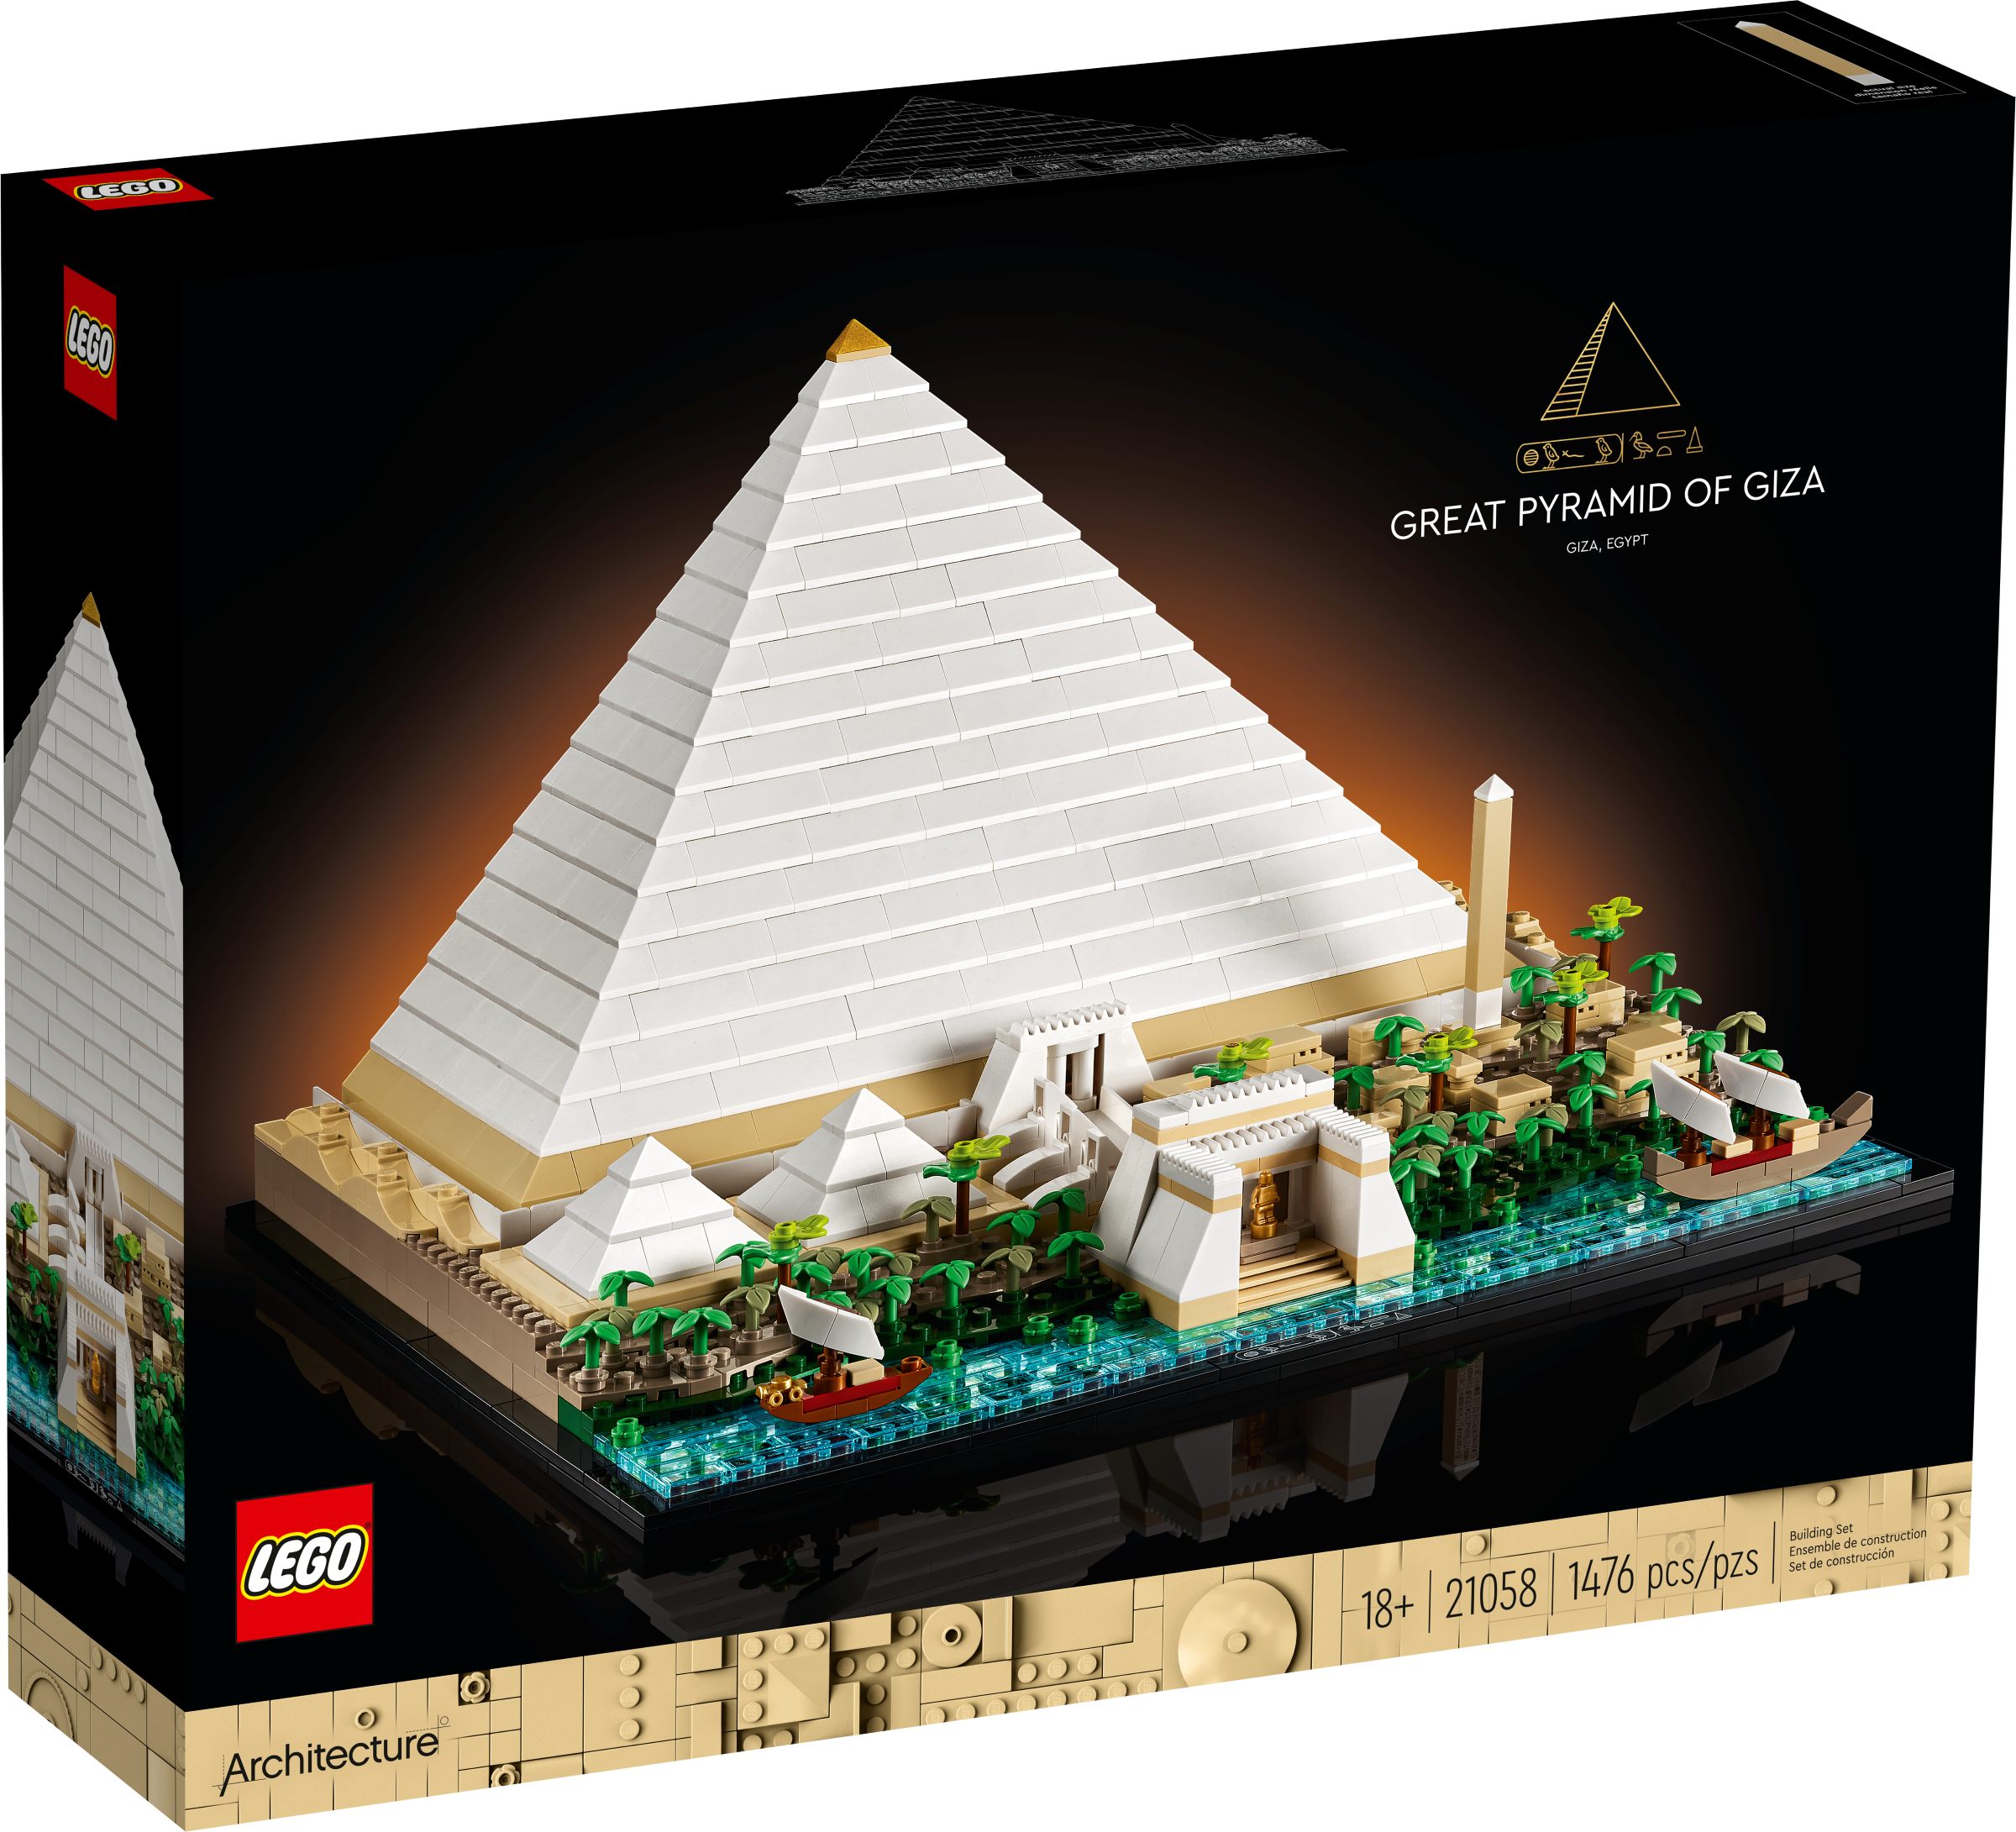 Great the | at LEGO® of 21058 online | Buy US Official Shop Architecture Giza Pyramid